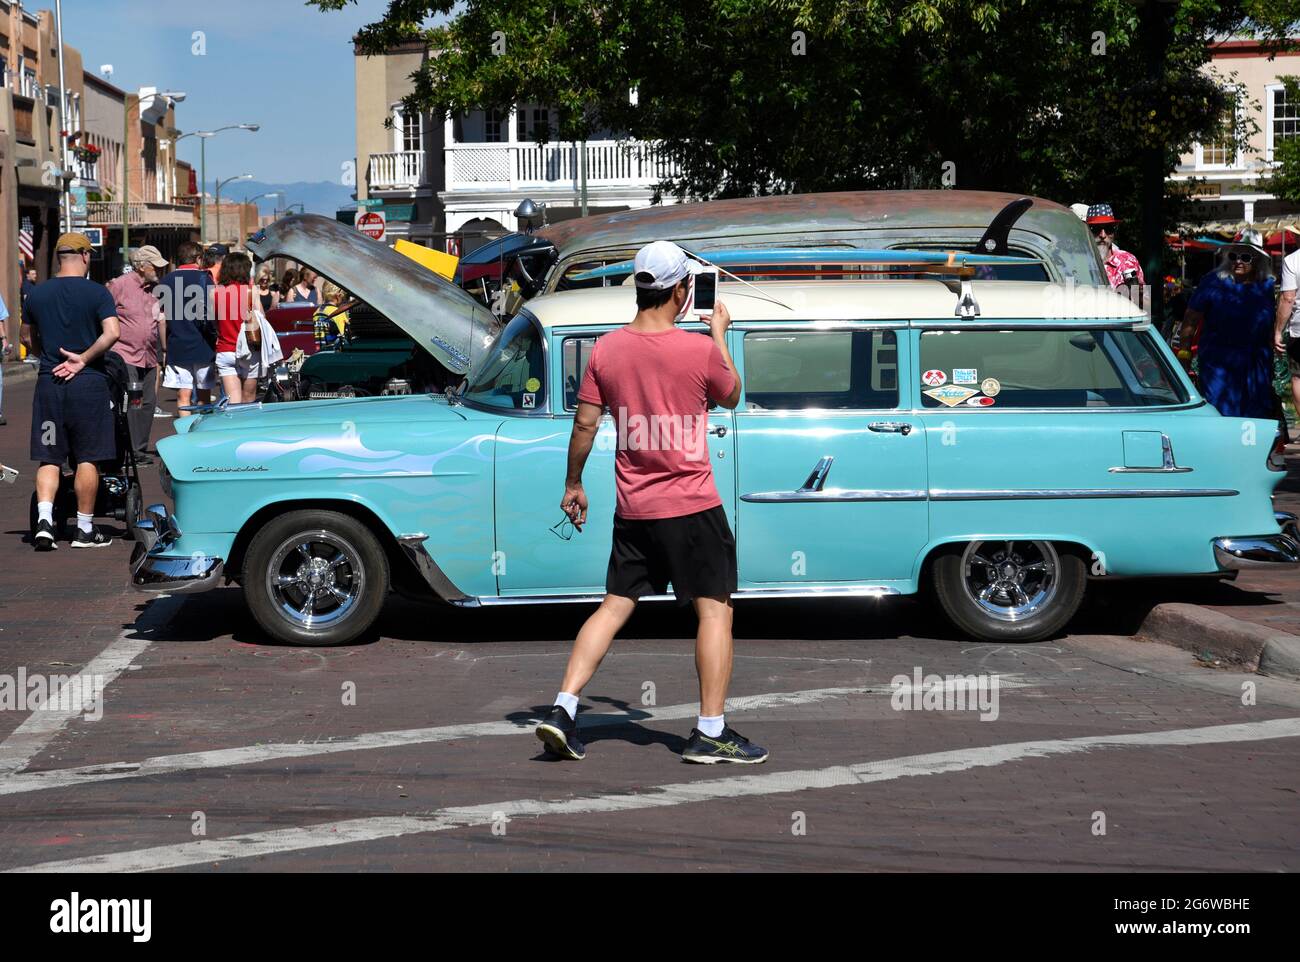 A 1956 Chevrolet station wagon on display at a Fourth of July classic car show in Santa Fe, New Mexico. Stock Photo